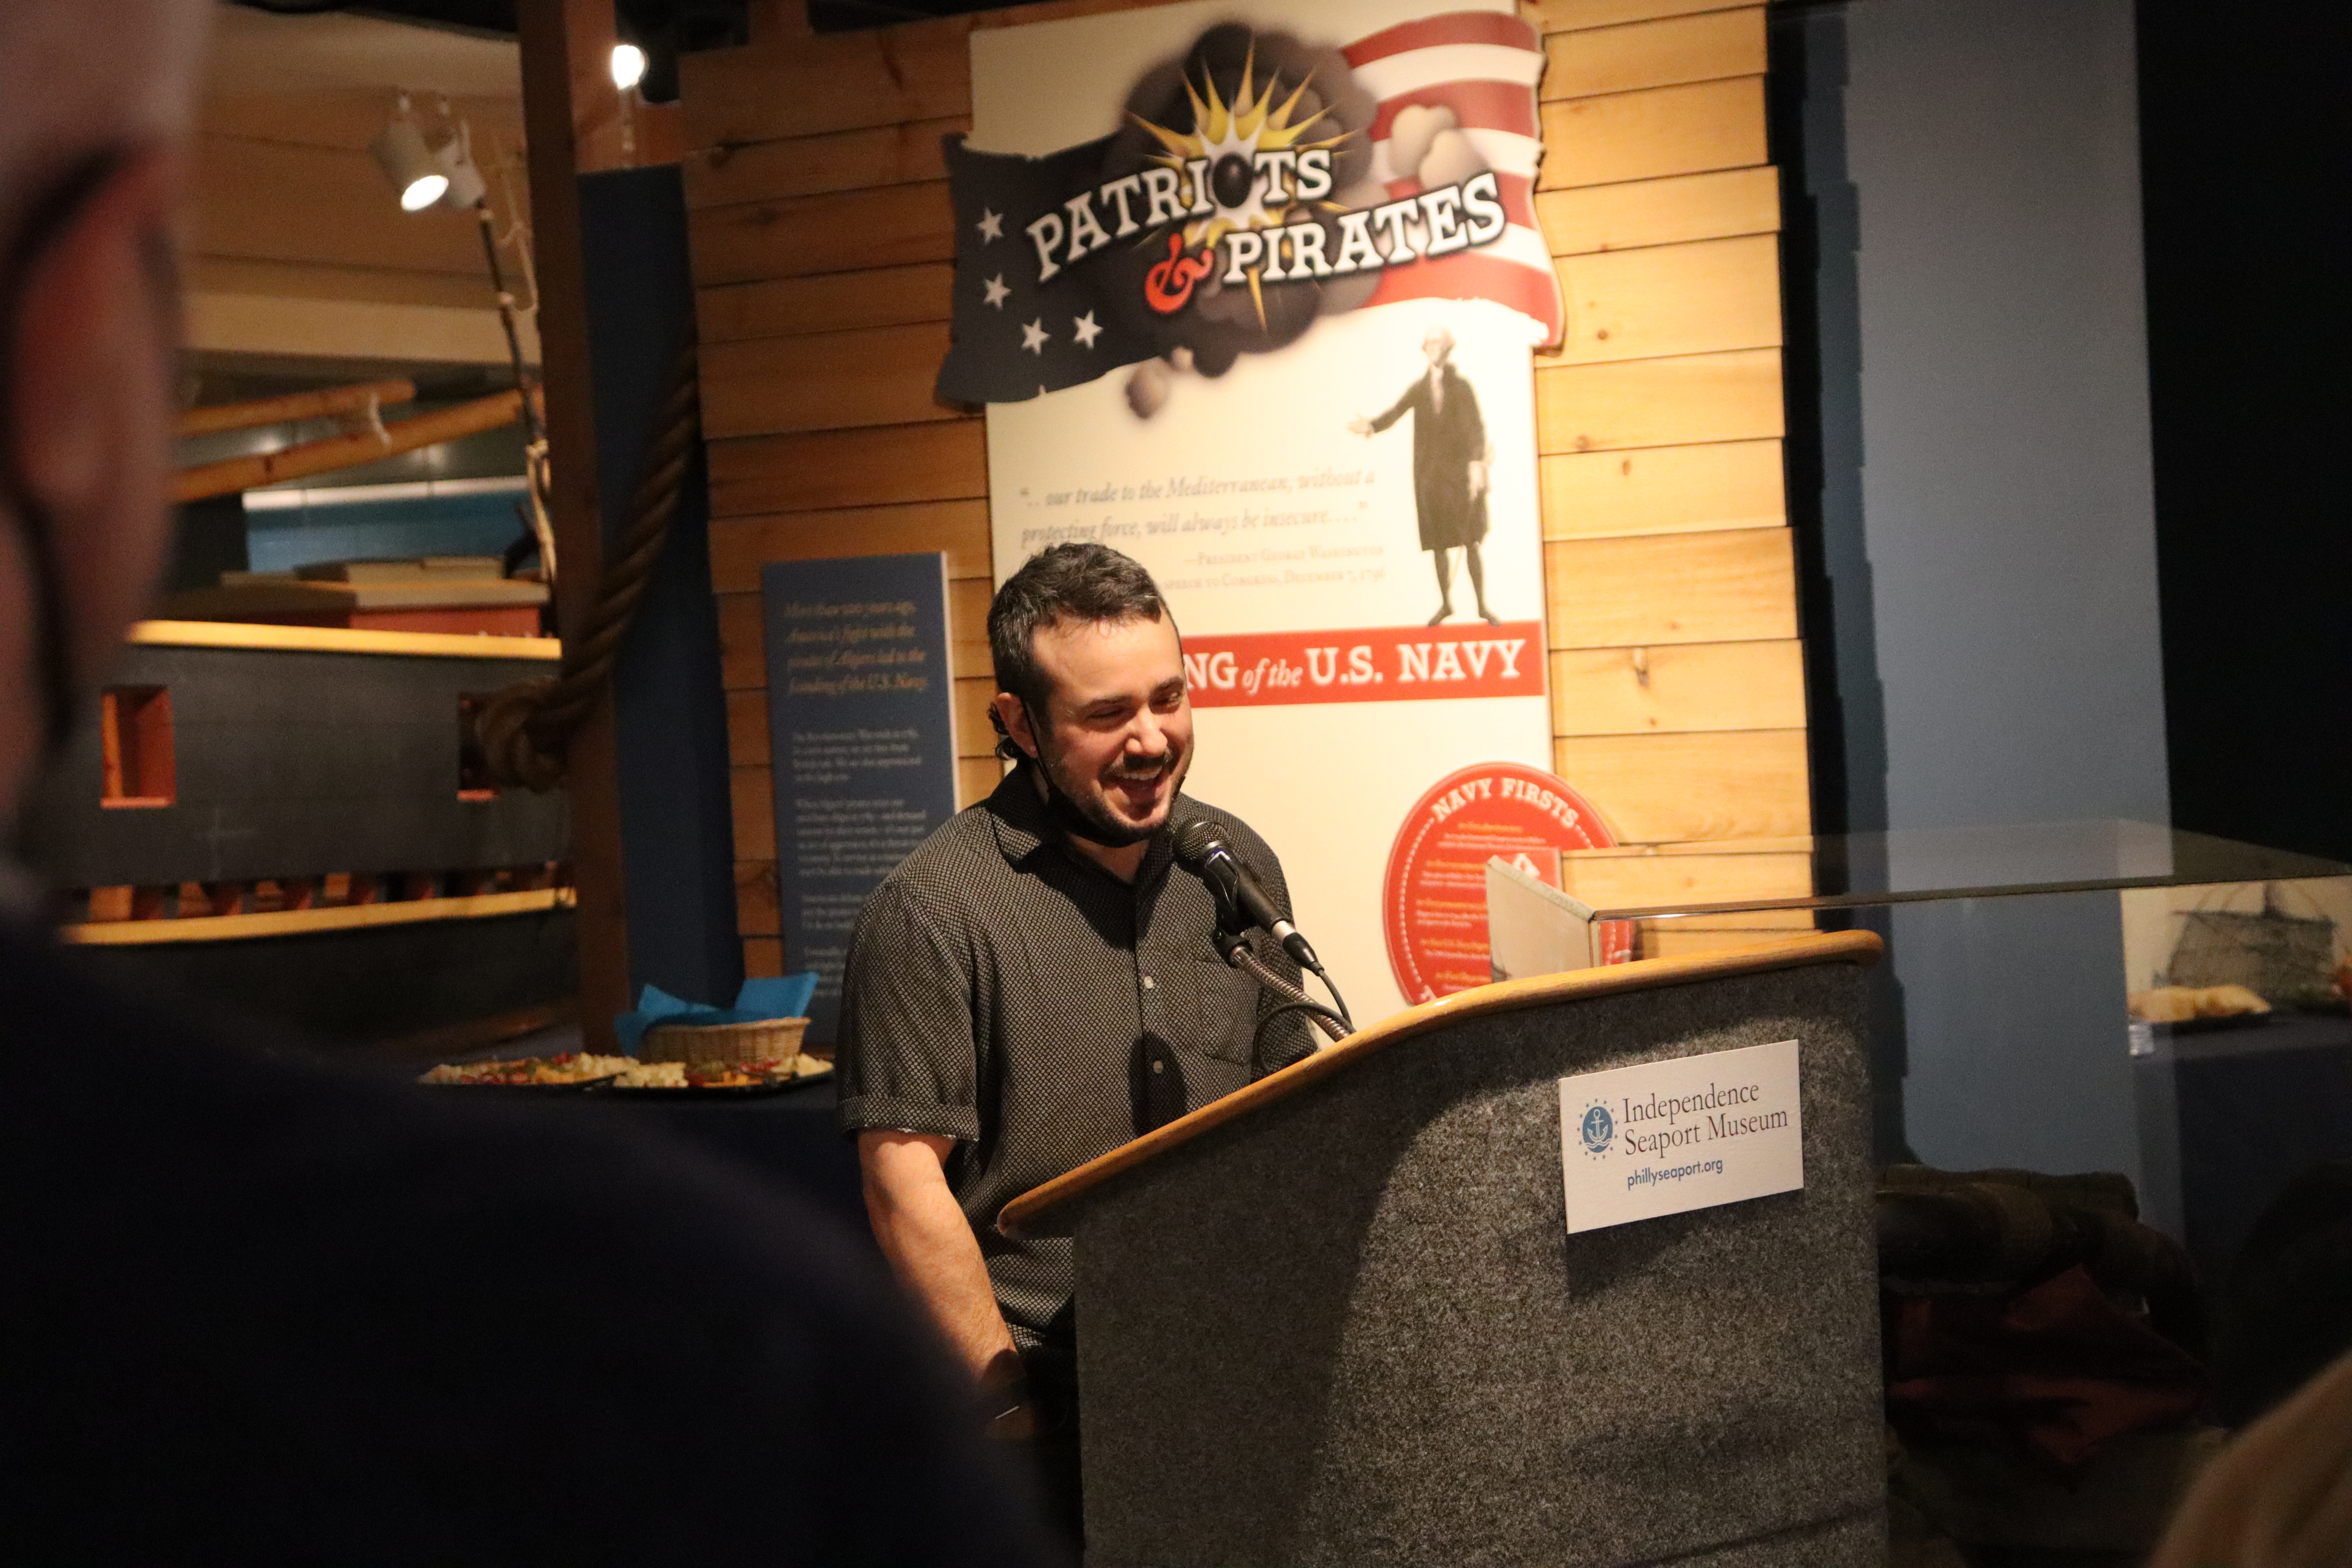 A man in a shirt with small white dots laughs as he gives remarks at a podium in a museum gallery.